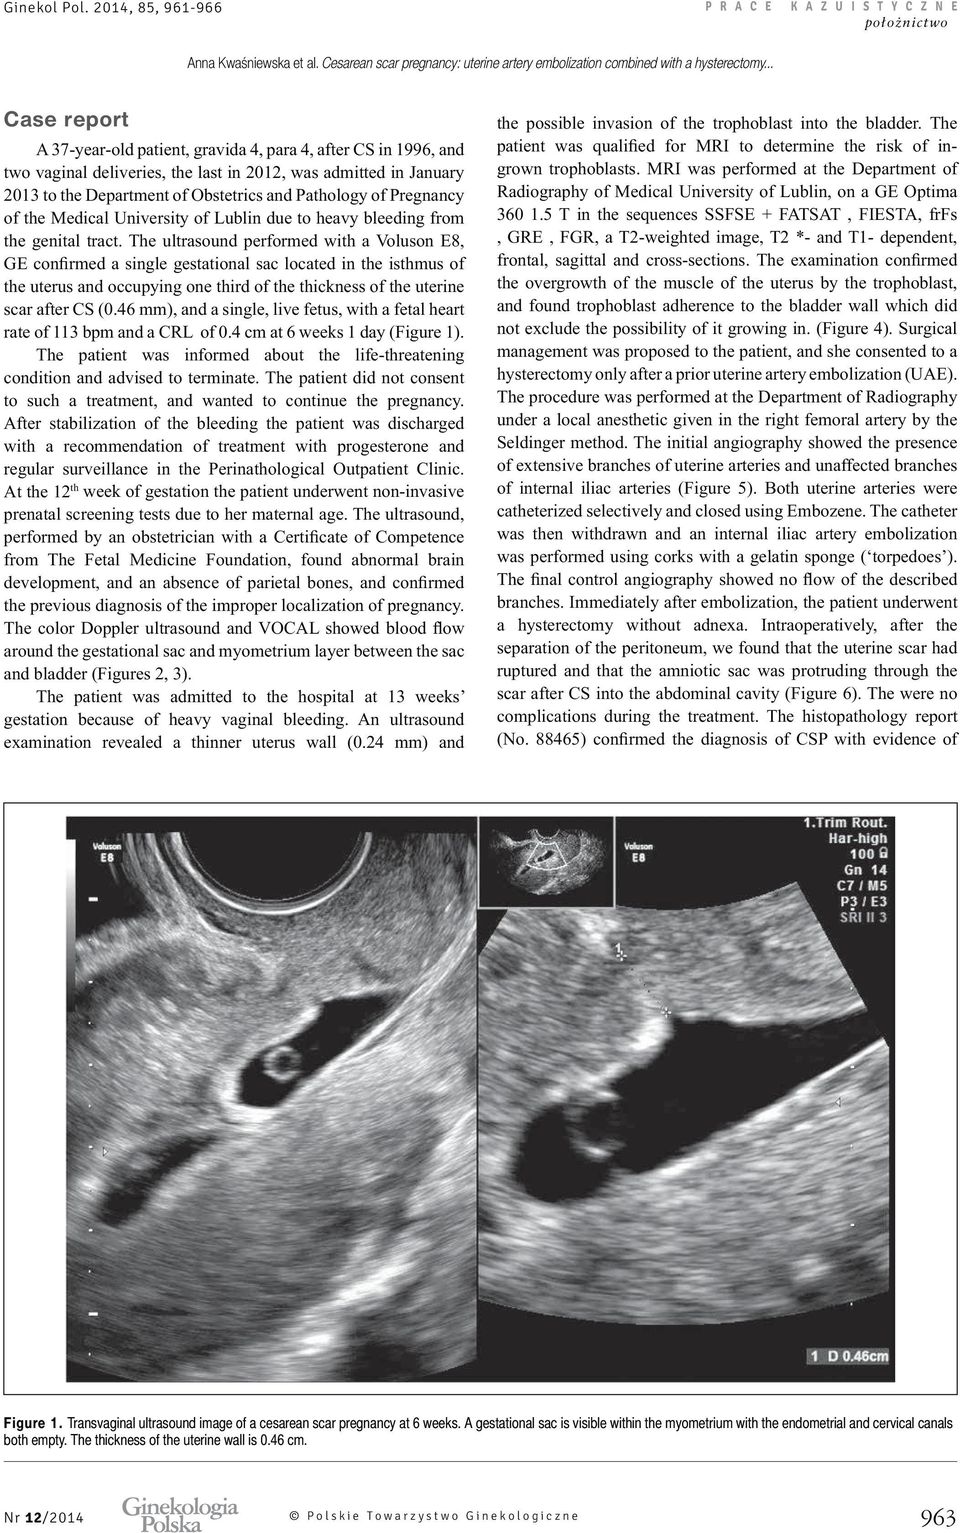 The ultrasound, from The Fetal Medicine Foundation, found abnormal brain around the gestational sac and myometrium layer between the sac and found trophoblast adherence to the bladder wall which did